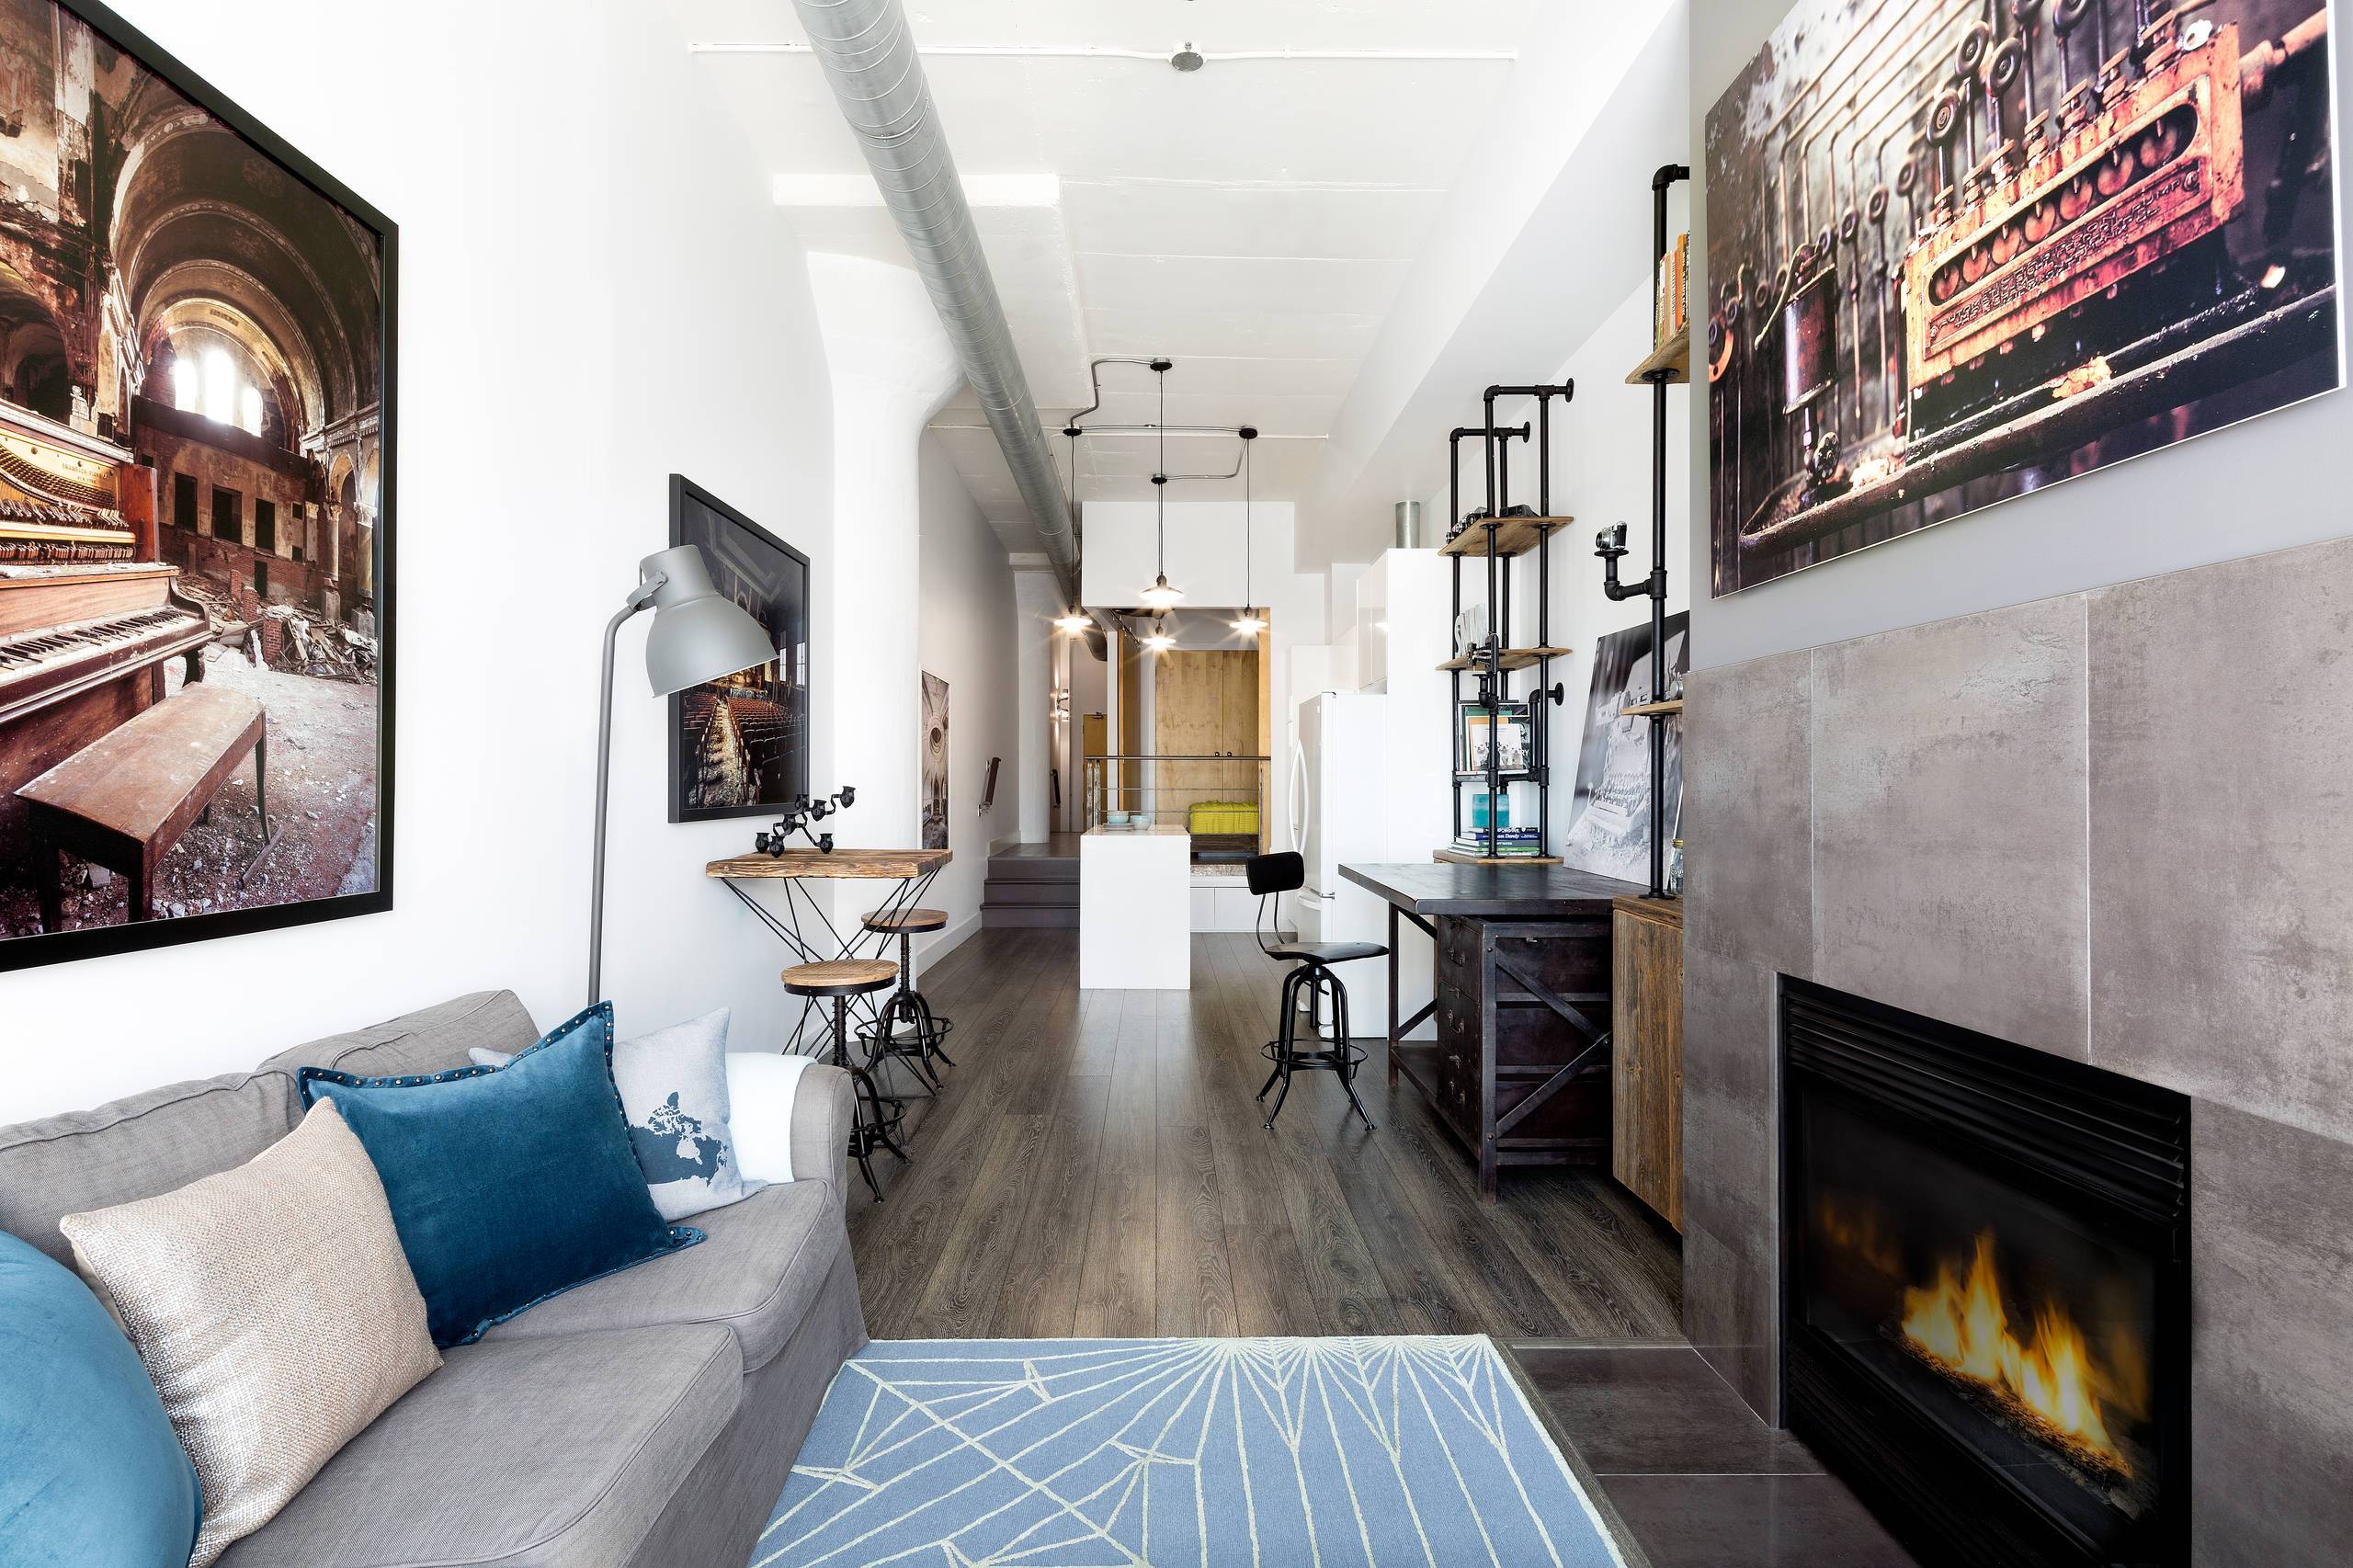 Charming industrial vibe (from Houzz)